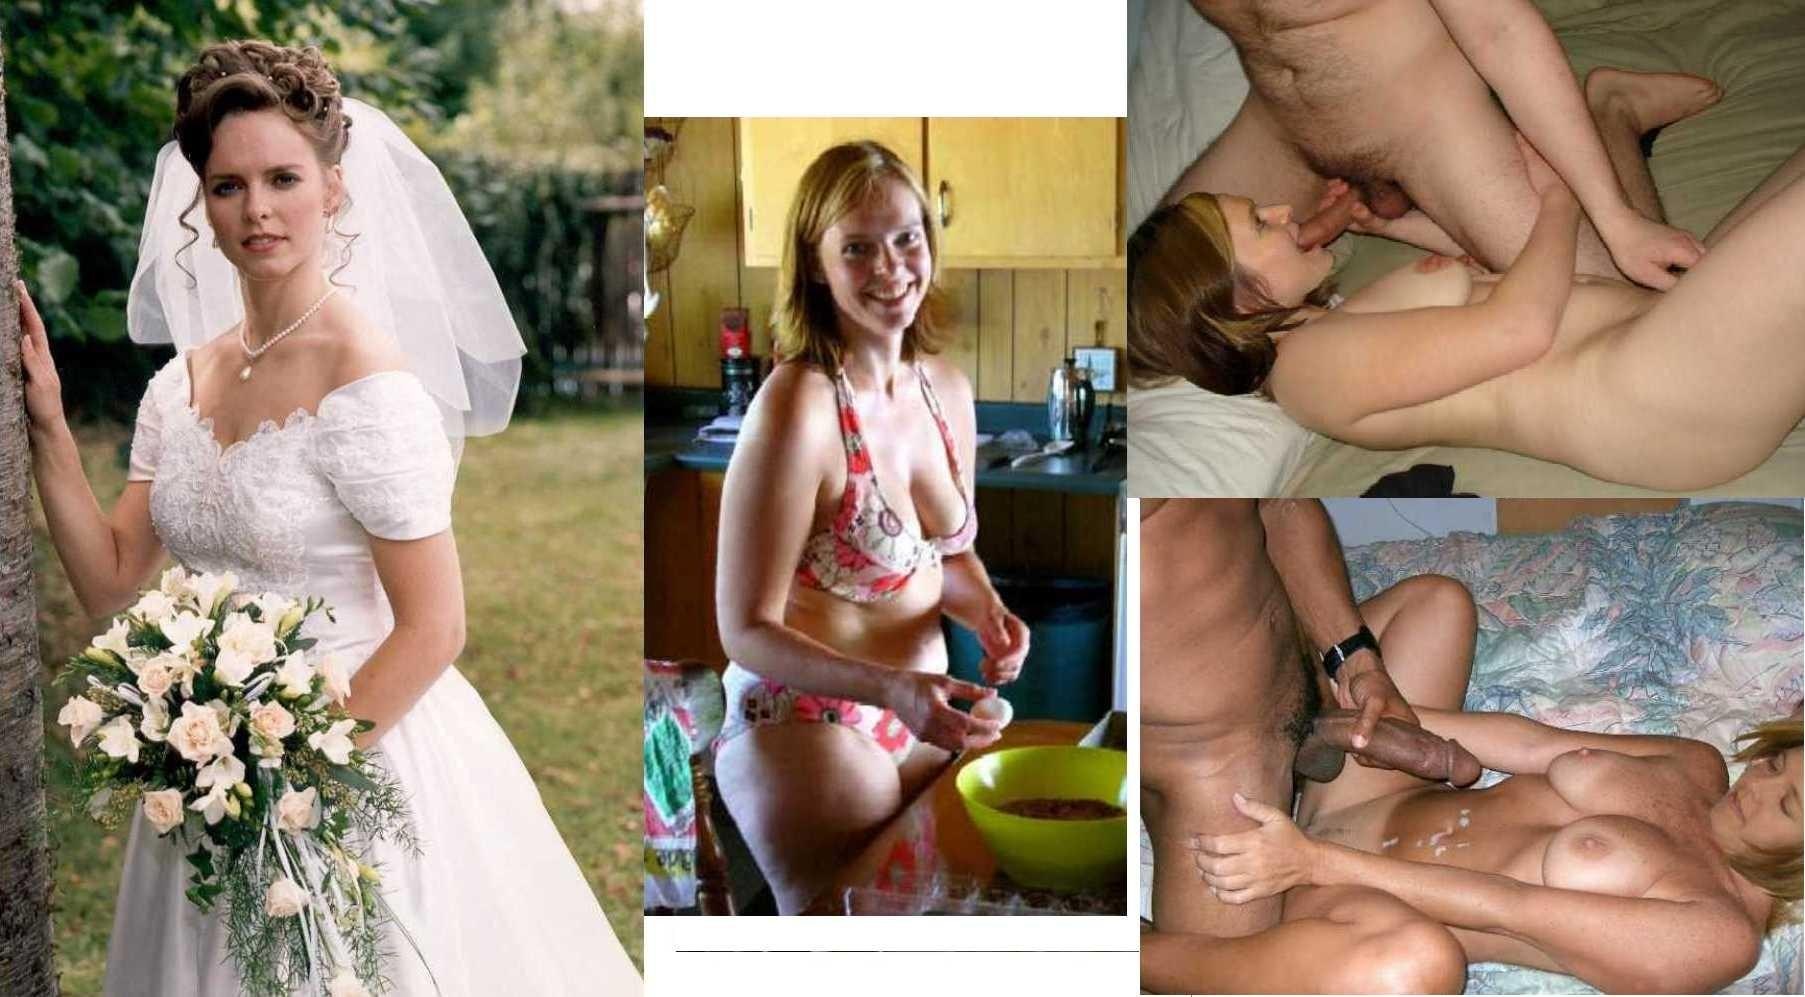 married woman porn galleries